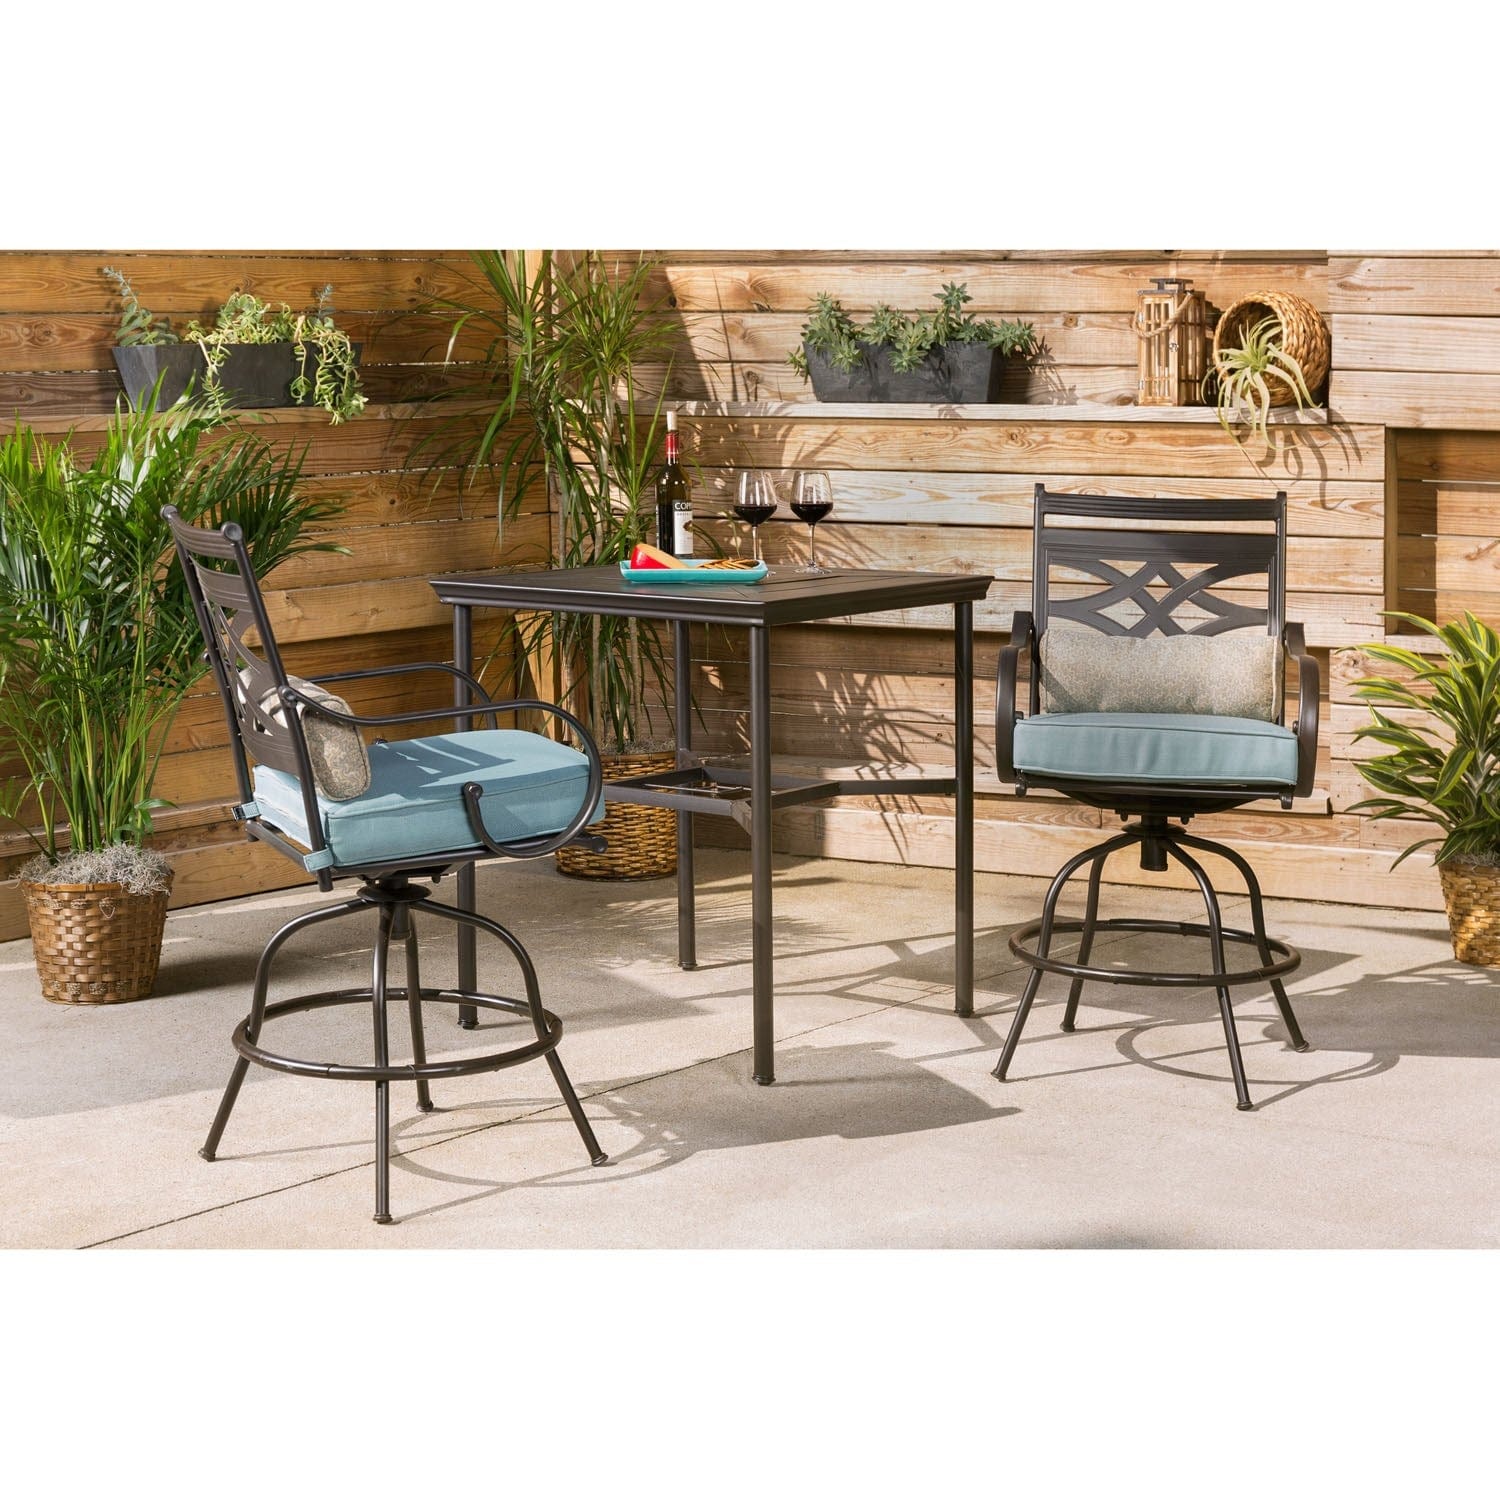 Hanover Outdoor Dining Set Hanover Montclair 3-Piece High-Dining Set in Ocean Blue with 2 Swivel Chairs and a 33-Inch Square Table | MCLRDN3PCBRSW2-BLU